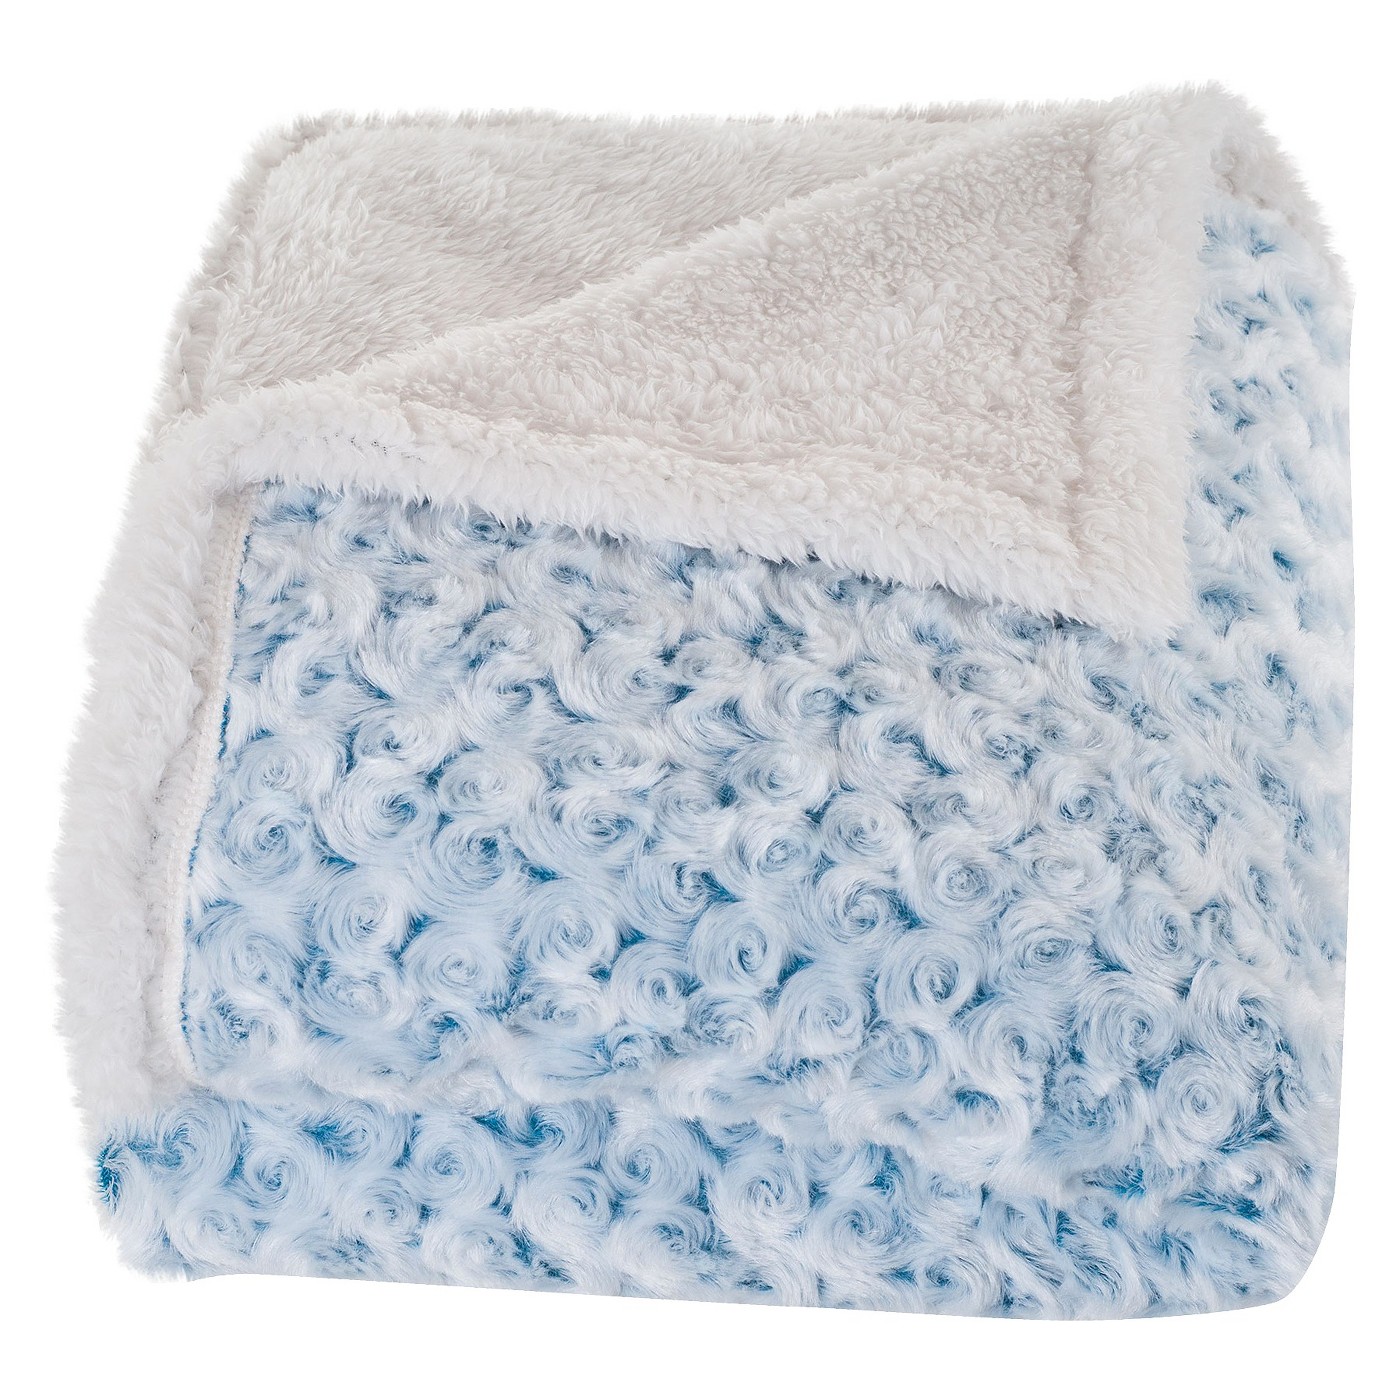 Plush Flower Fleece Sherpa Backed Throw - Yorkshire Home - image 1 of 4